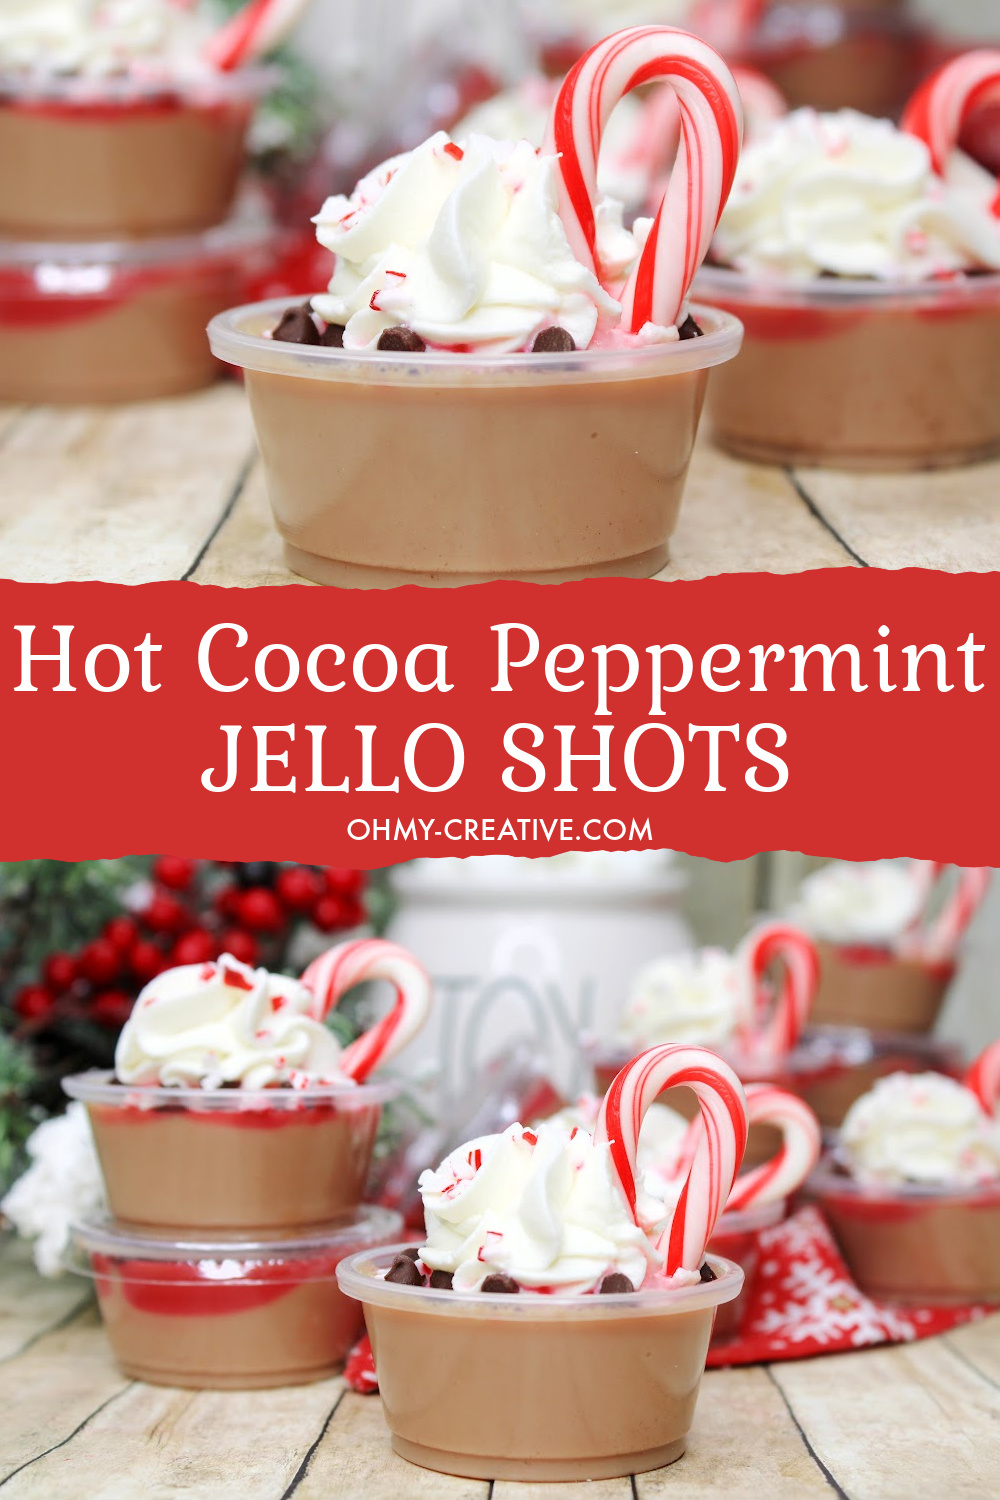 Hot cocoa peppermint jello shots with festive holiday decorations are the perfect Christmas jello shots.